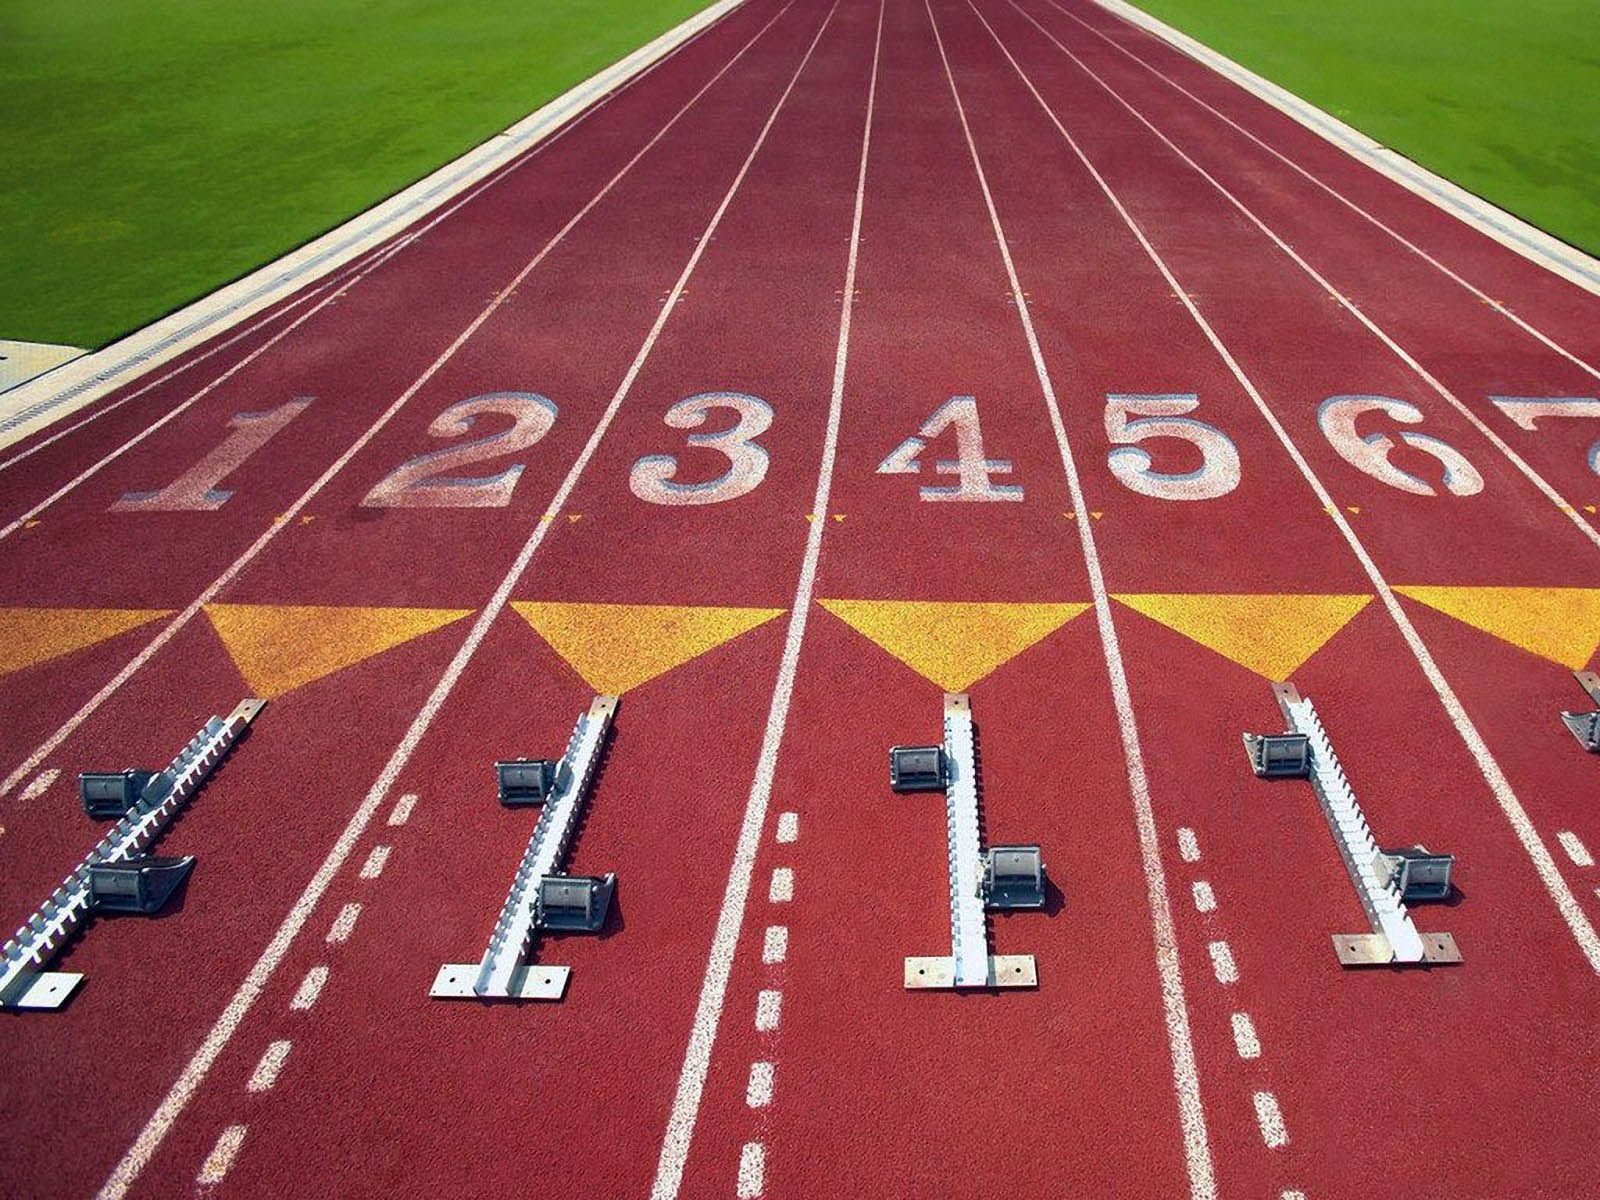 Track and field wallpapers